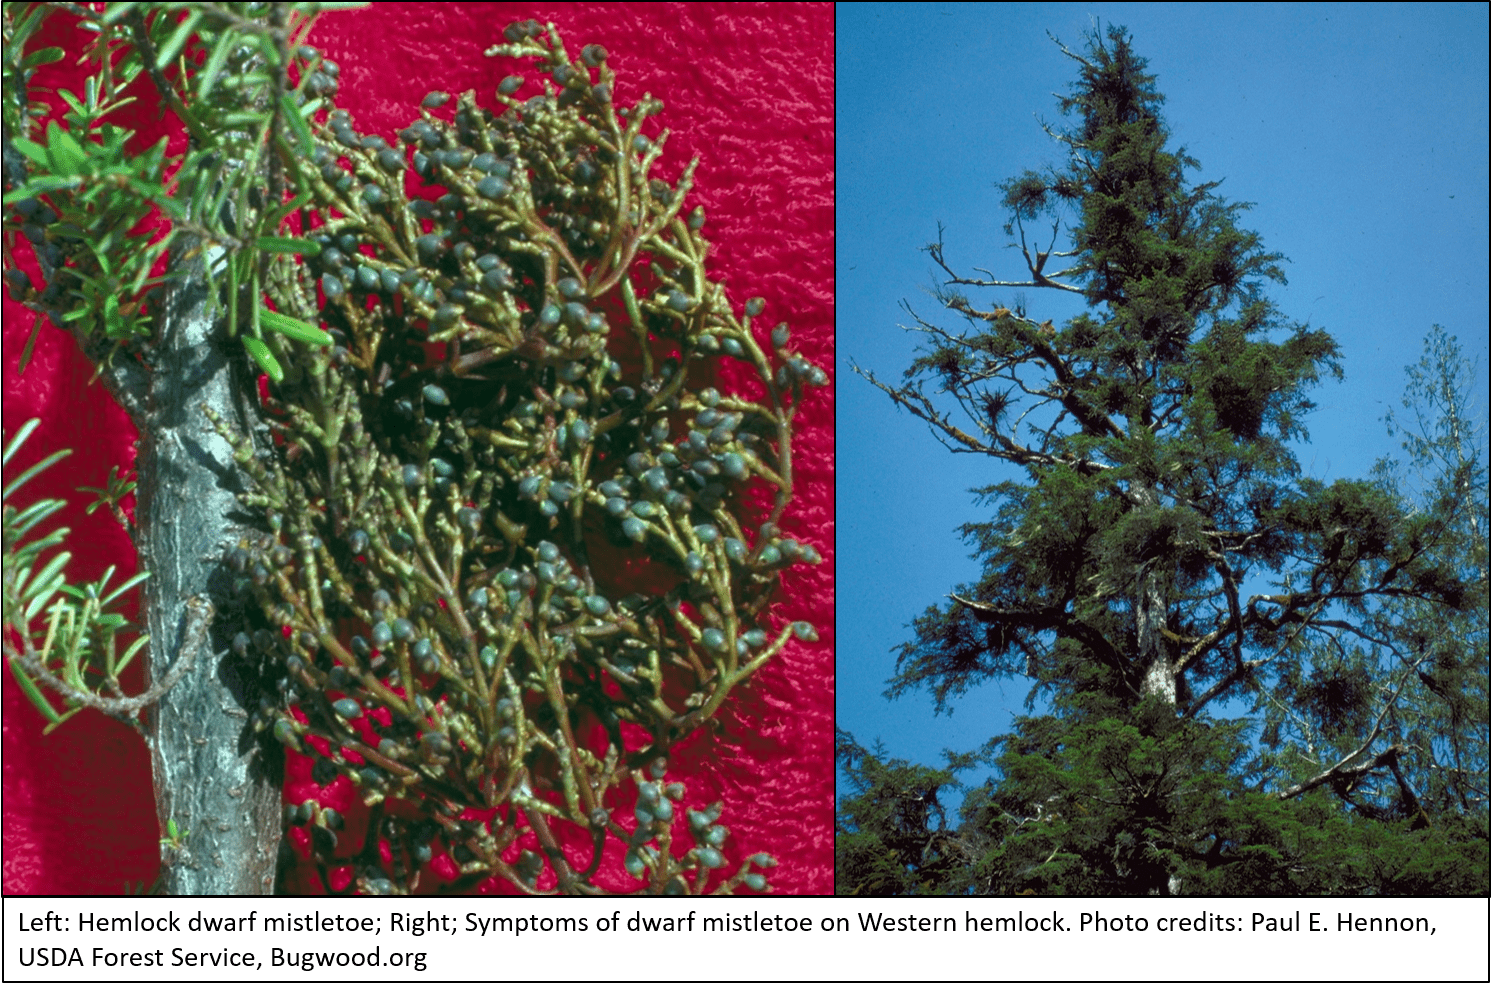 Side-by-side photos show a close-up view of a dwarf mistletoe plant on a hemlock tree stem, and an overall look at the e